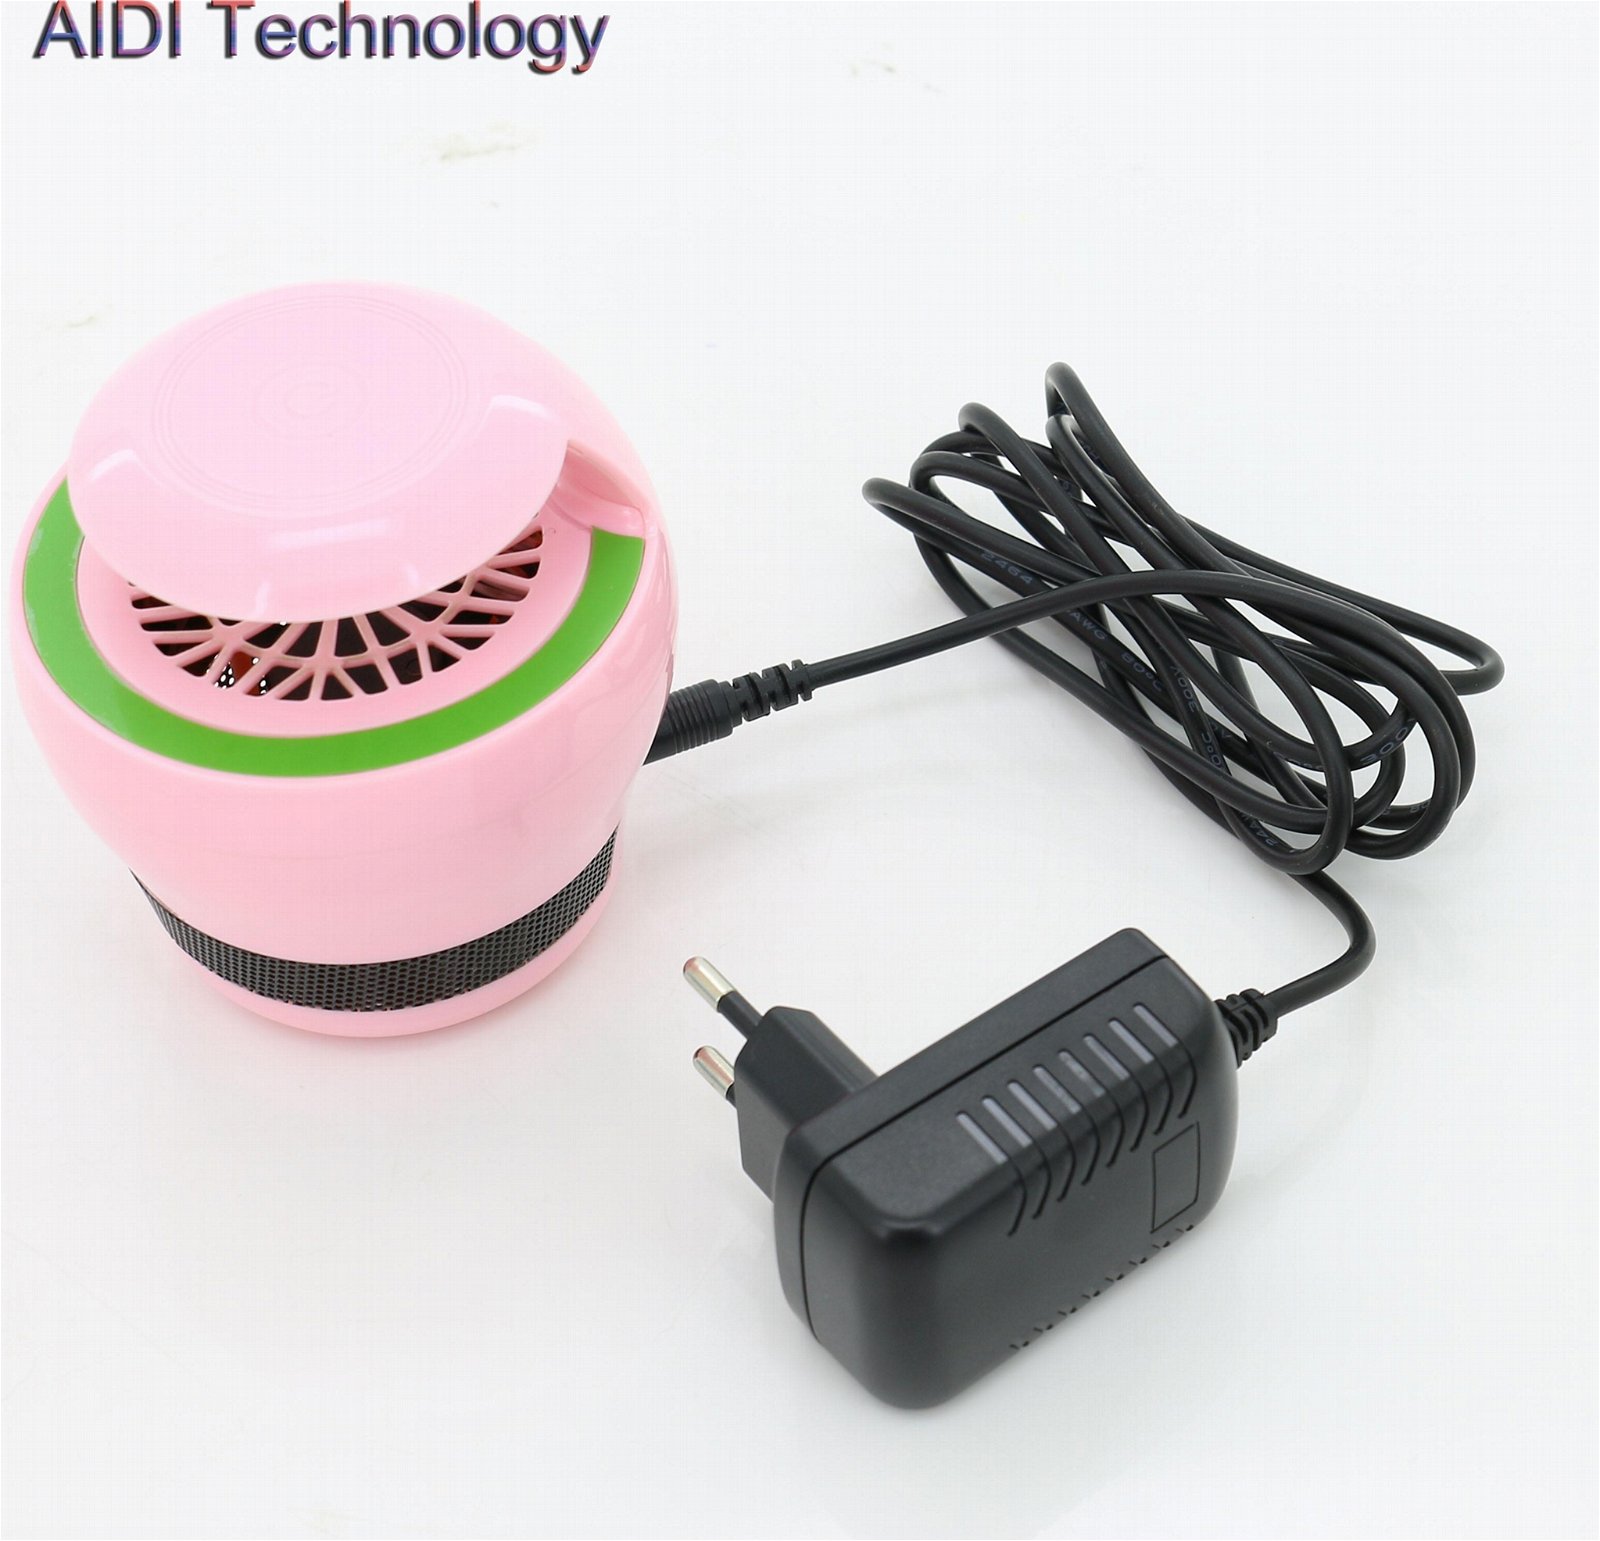  mosquito killer car air cleaner Vehicle-mounted air purifier 2